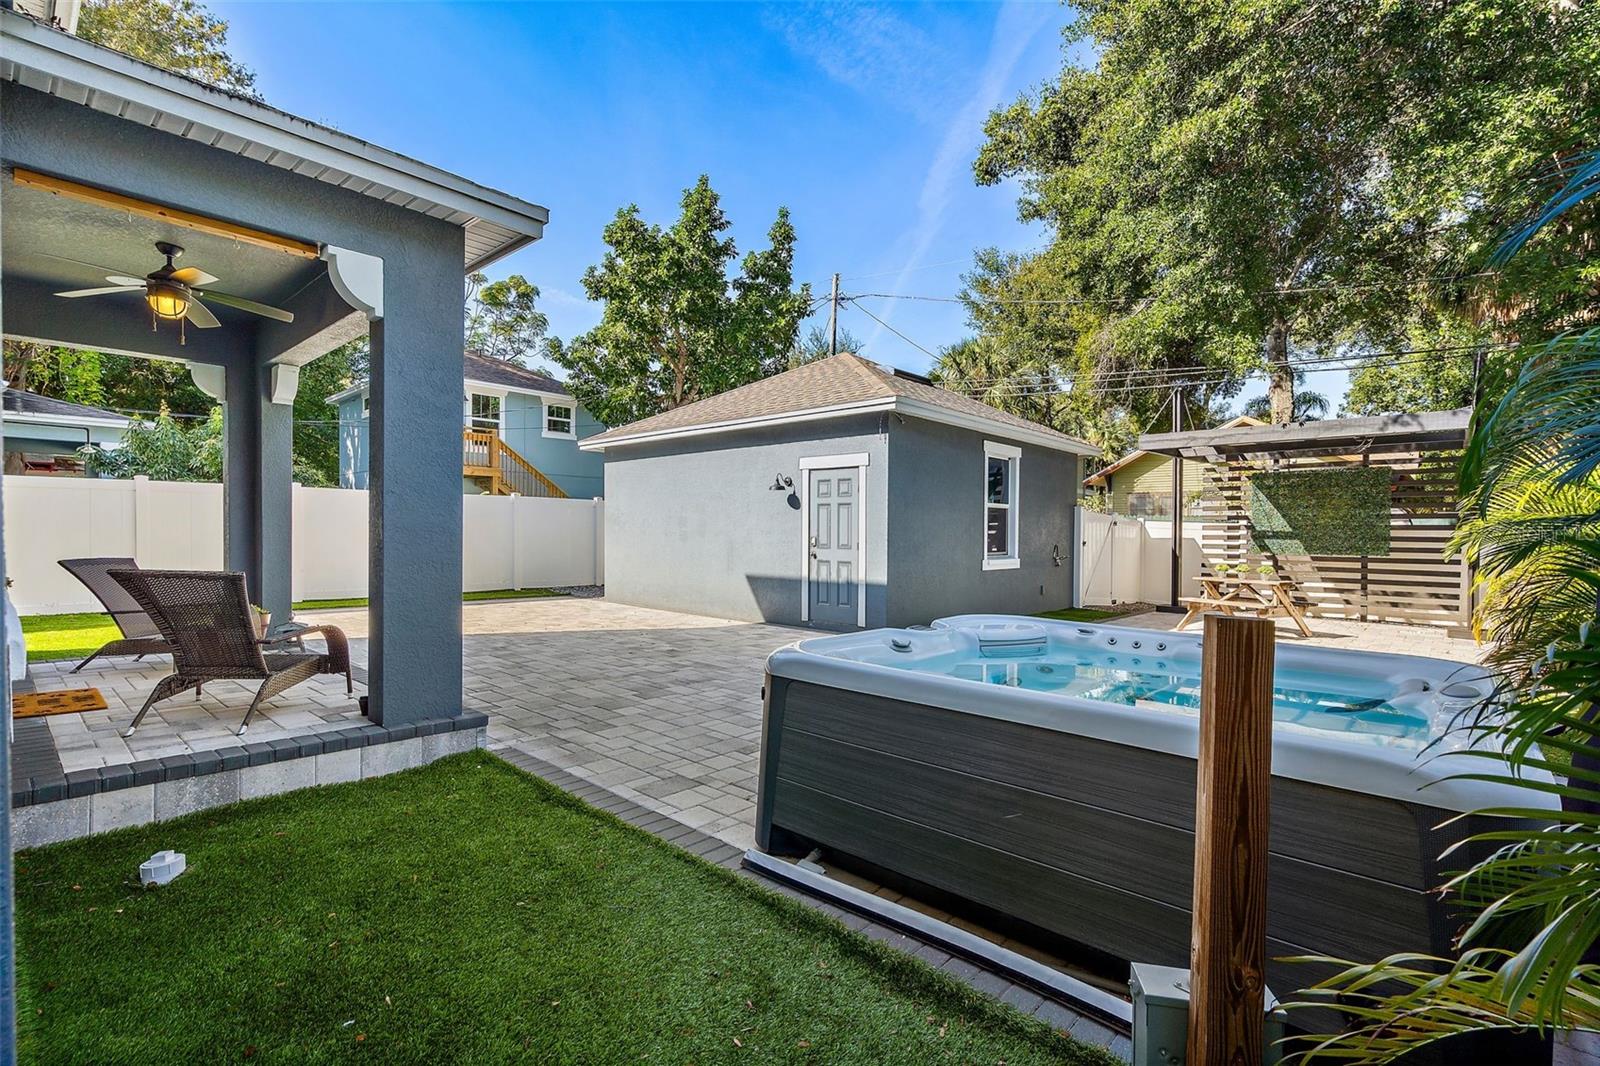 Backyard retreat with newer hot tub, outdoor shower, pavers, turf, and detached garage with alley access.